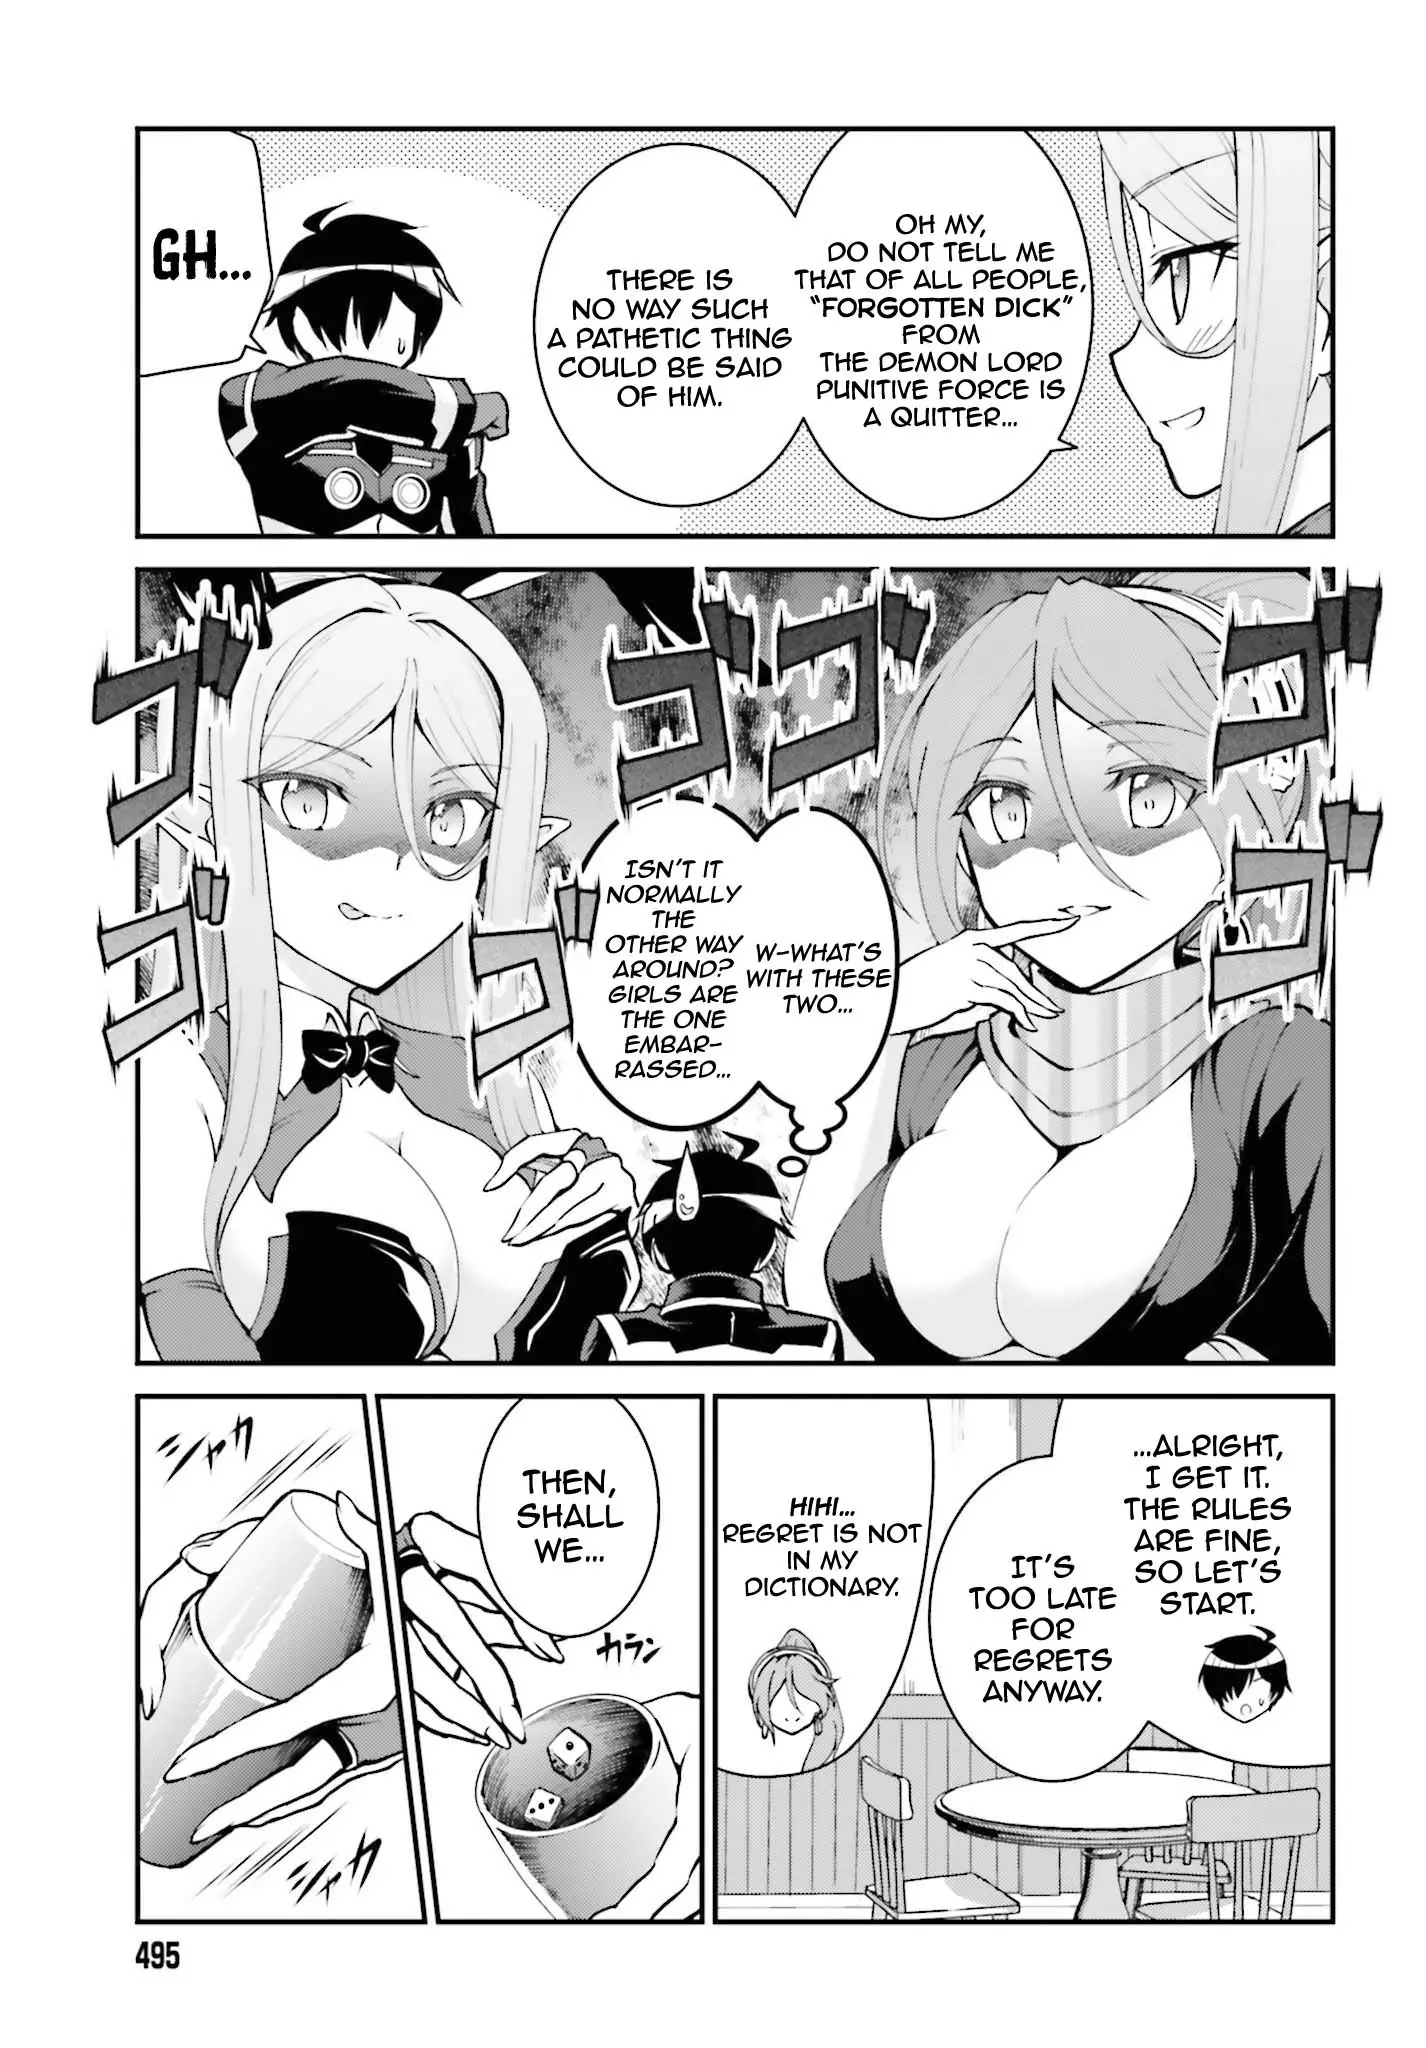 He Didn't Want To Be The Center Of Attention, Hence, After Defeating The Demon Lord, He Became A Guild Master - 21 page 4